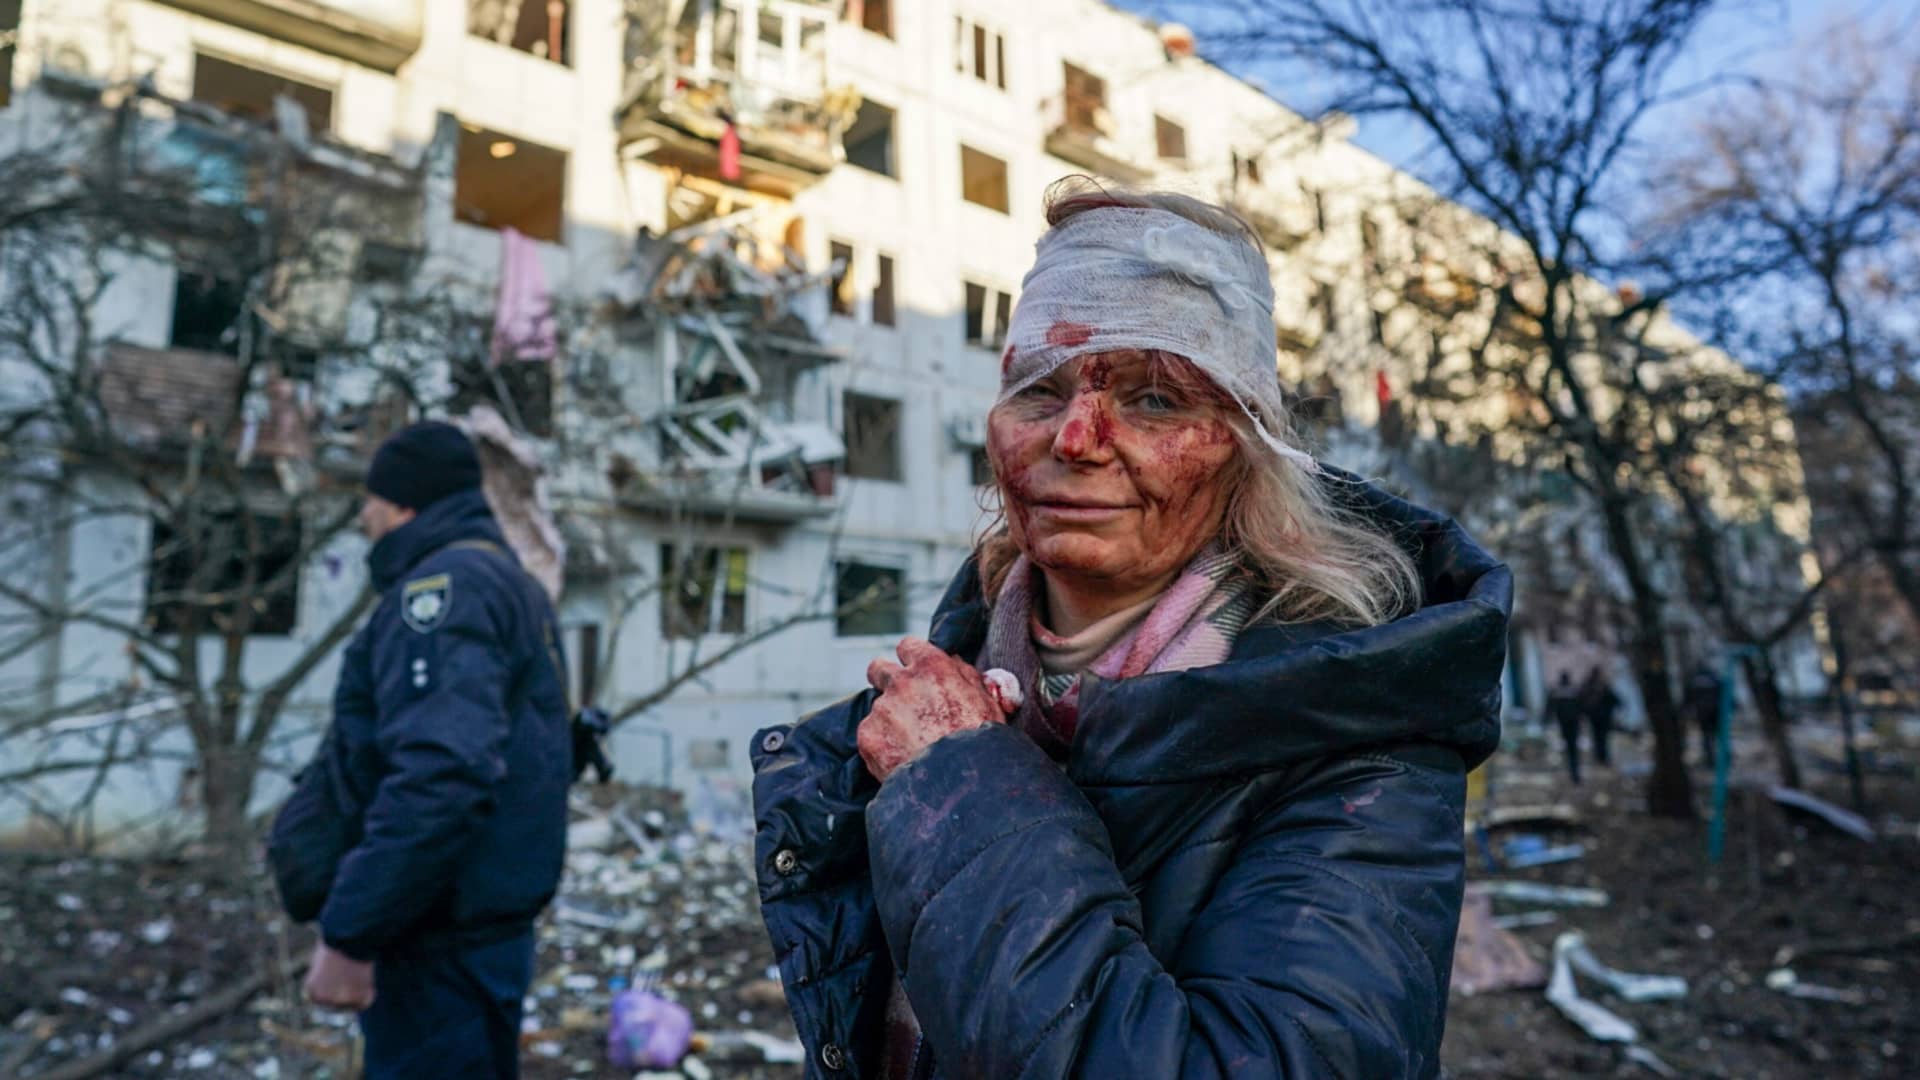 A wounded woman is seen after an airstrike damaged an apartment complex in city of Chuhuiv, Kharkiv Oblast, Ukraine on February 24, 2022.